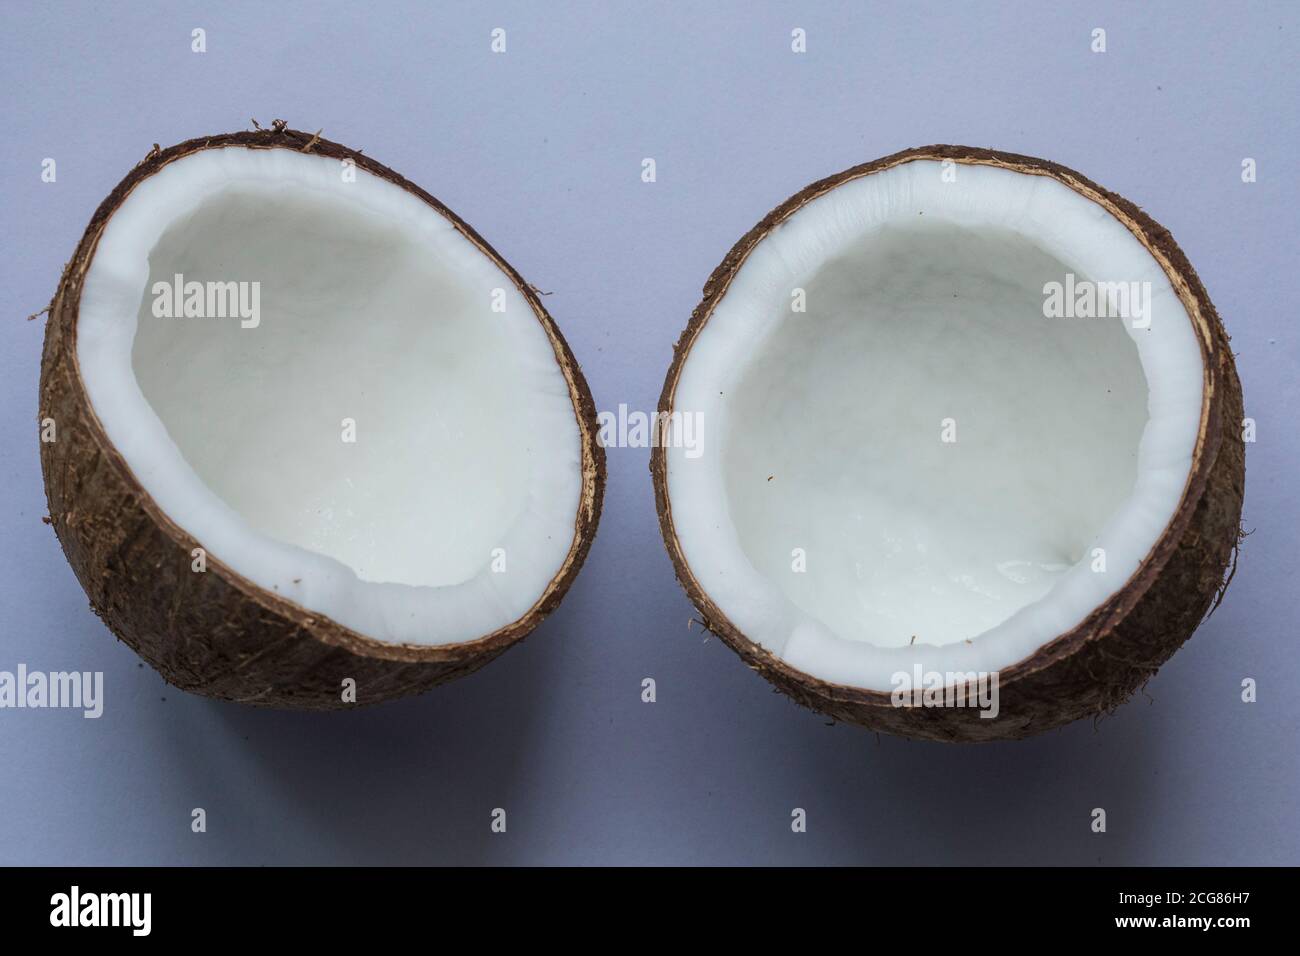 Two halves of a coconut on white background. Stock Photo